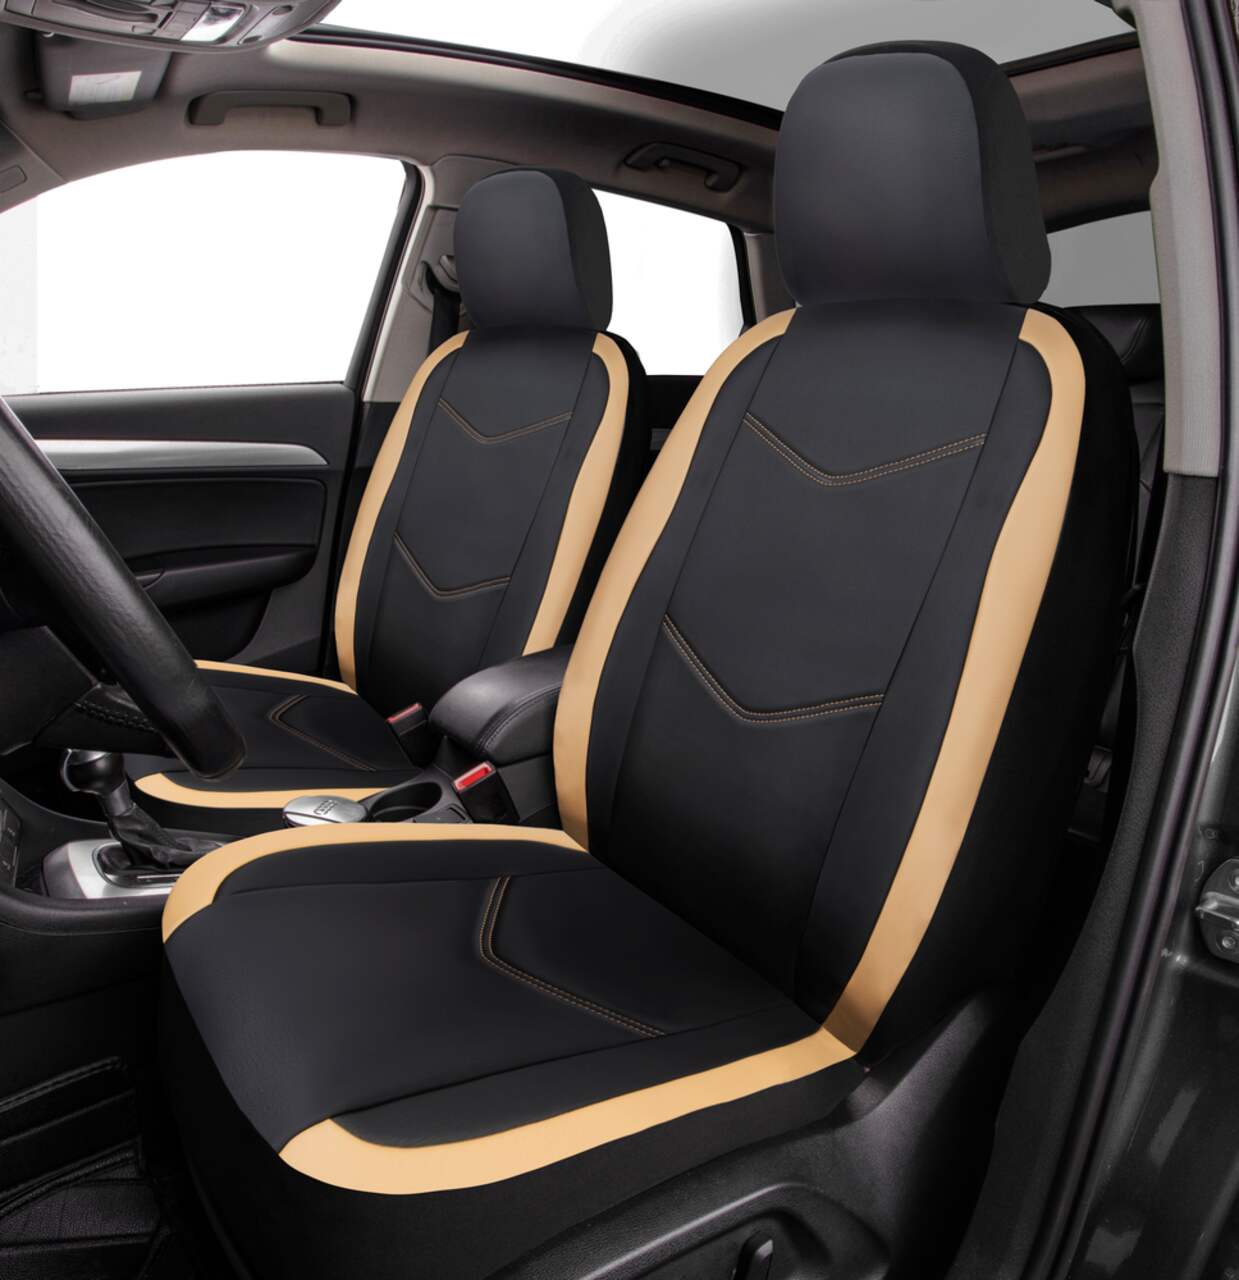 AutoTrends 2-Tone Faux Leather Seat Cover, Tan & Black | Canadian Tire